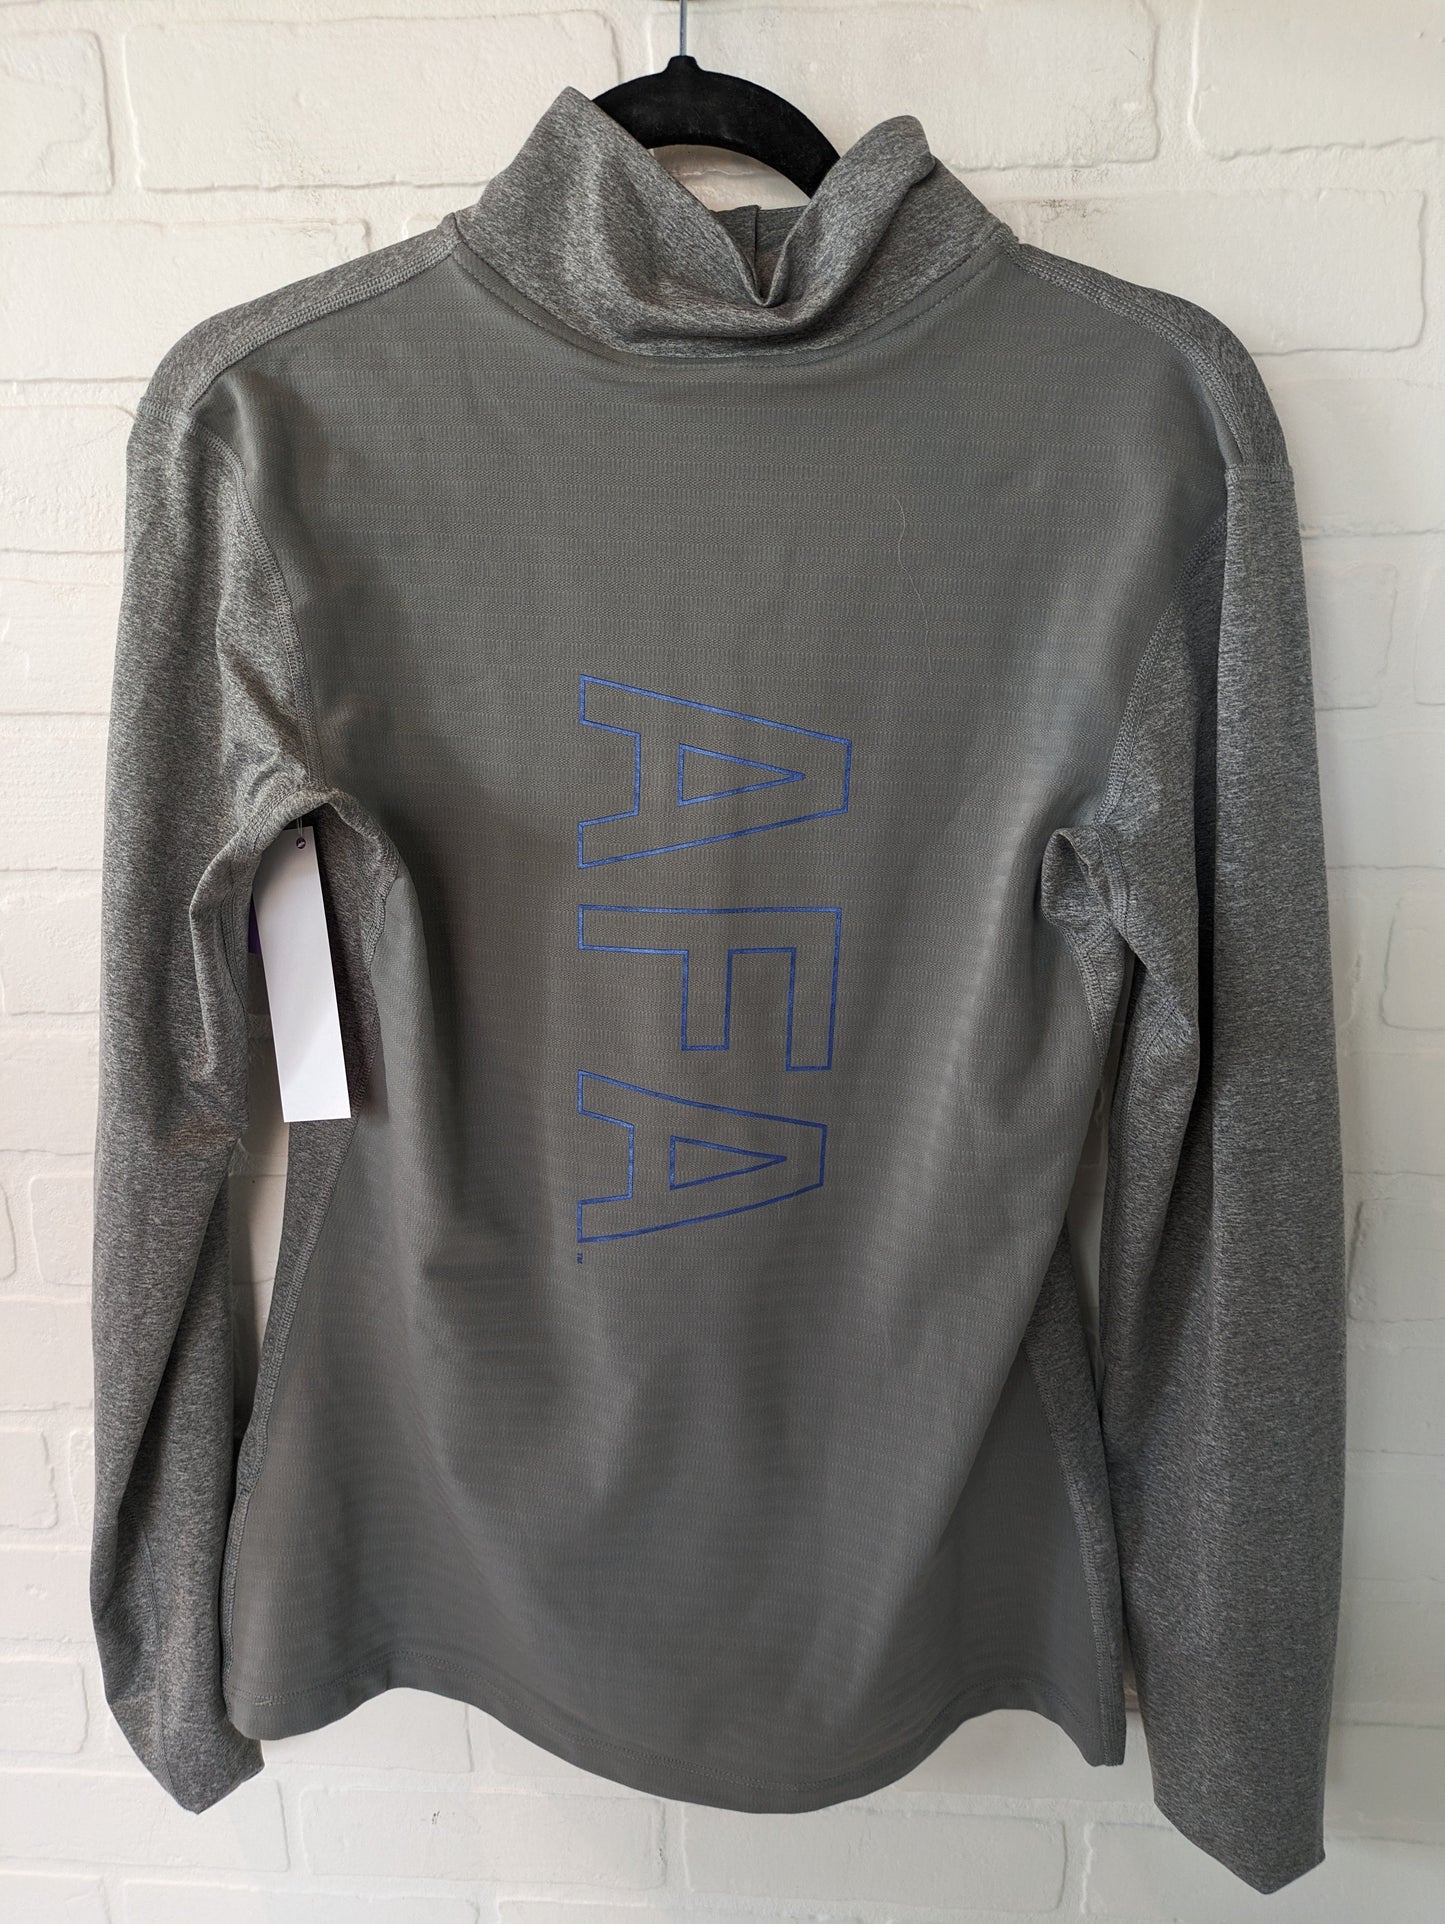 Grey Athletic Top Long Sleeve Collar Nike, Size L